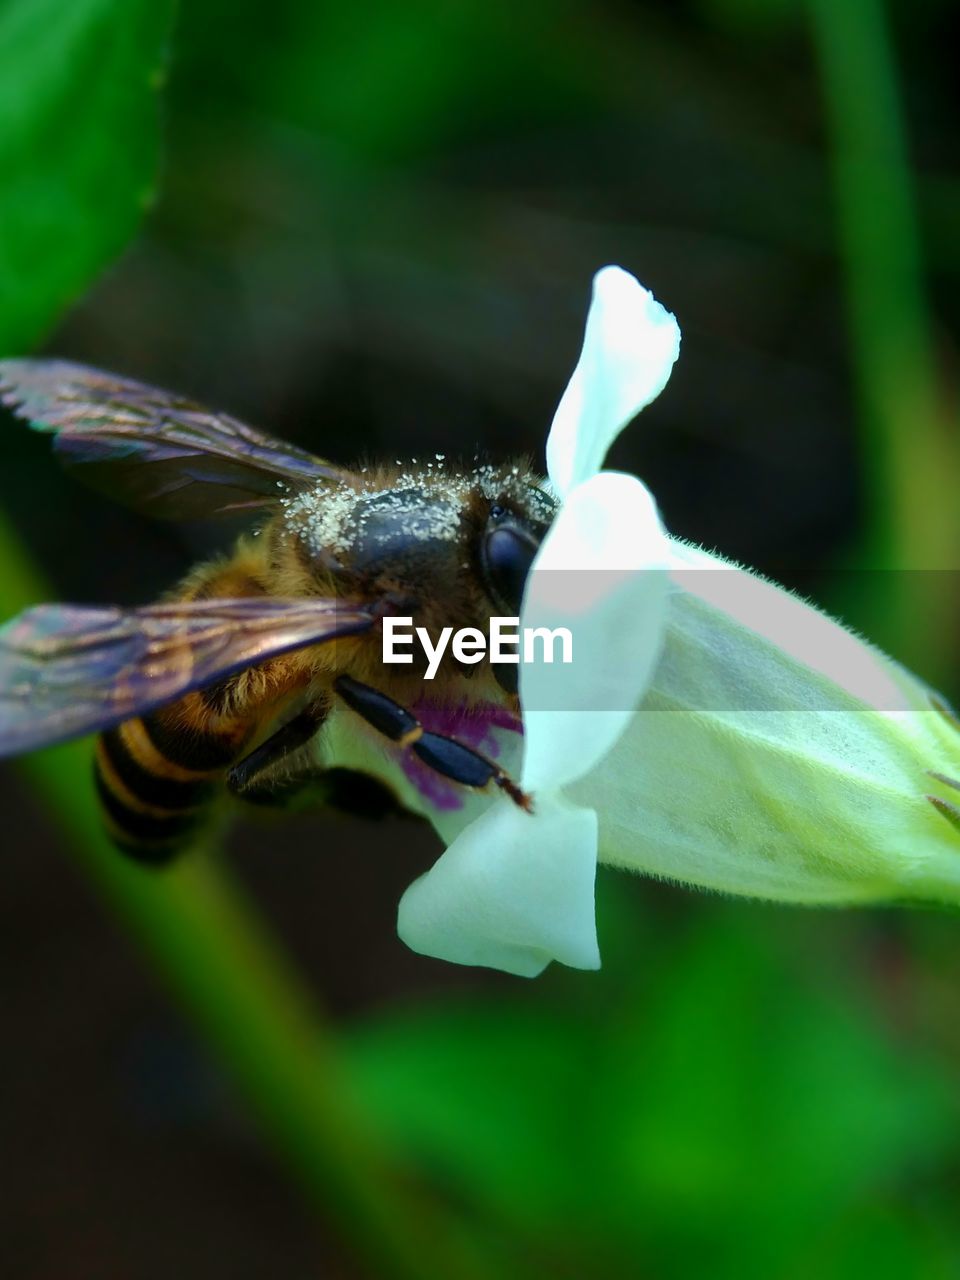 CLOSE-UP OF HONEY BEE FLYING